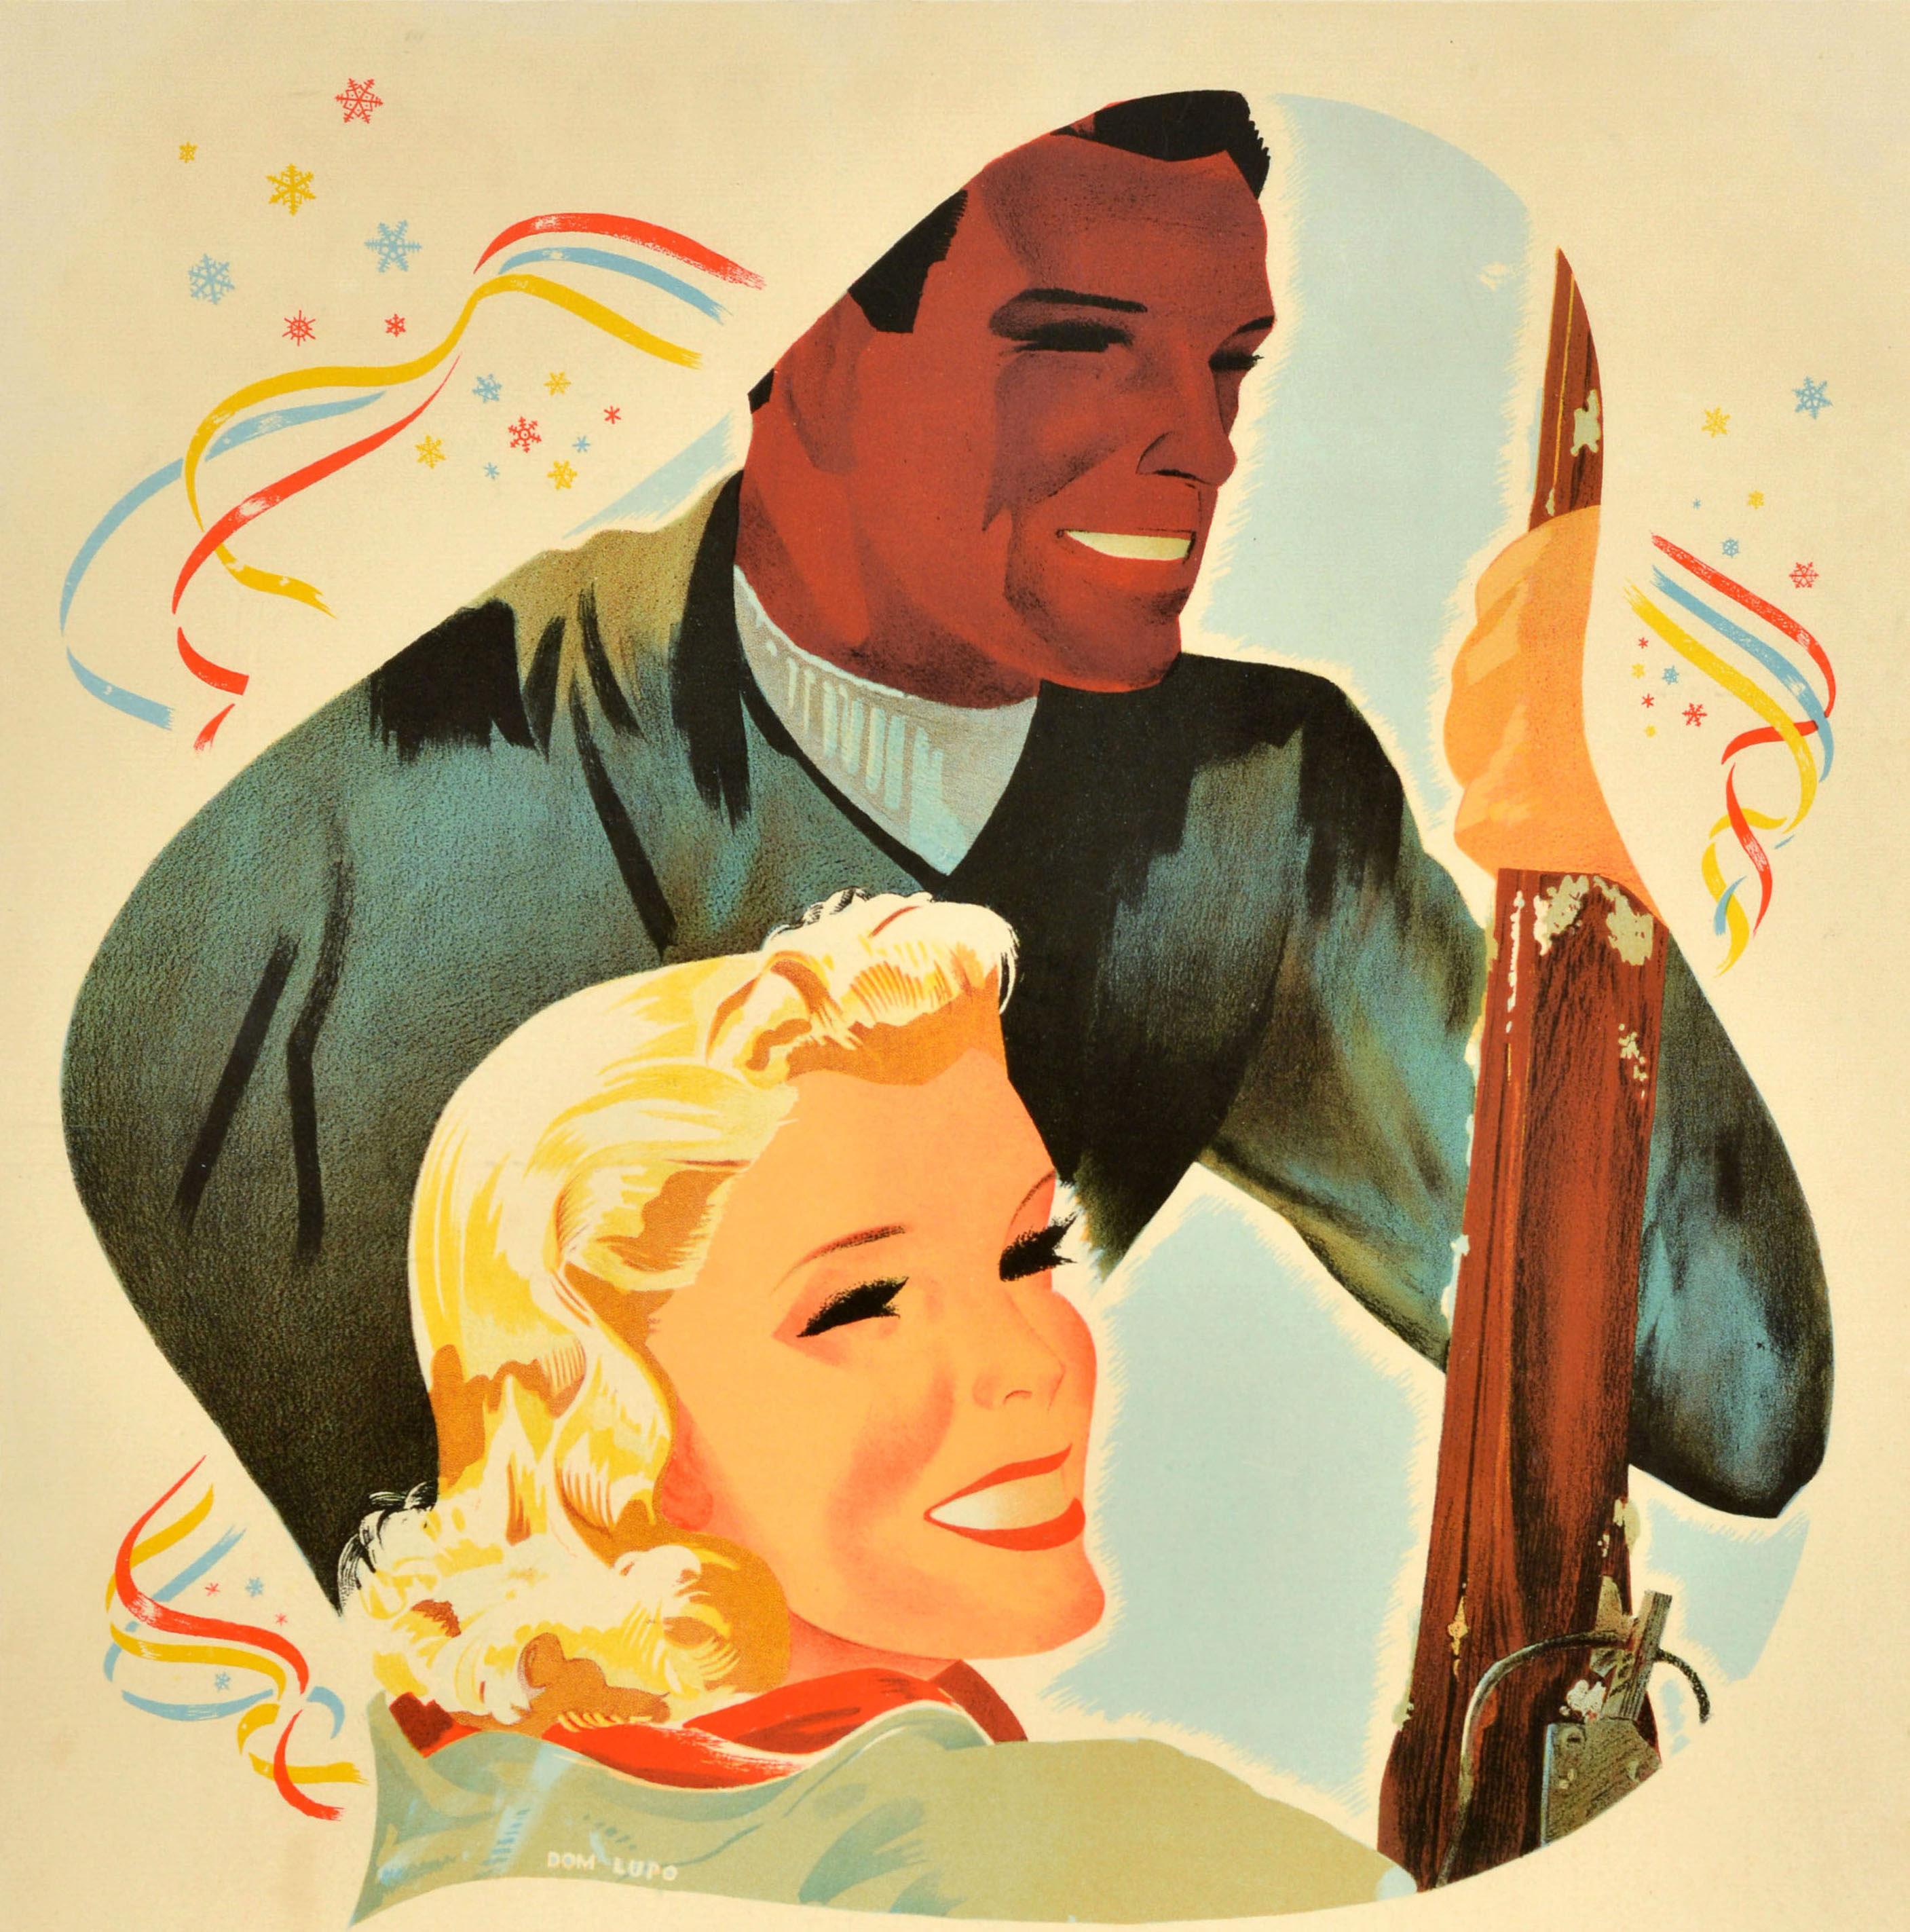 Original vintage skiing sport poster for the Dartmouth Winter Carnival held on 6-7 February 1942 featuring a design by Dom Lupo depicting the bold title text below an image of a smiling young lady and man holding skis with colourful red, yellow and